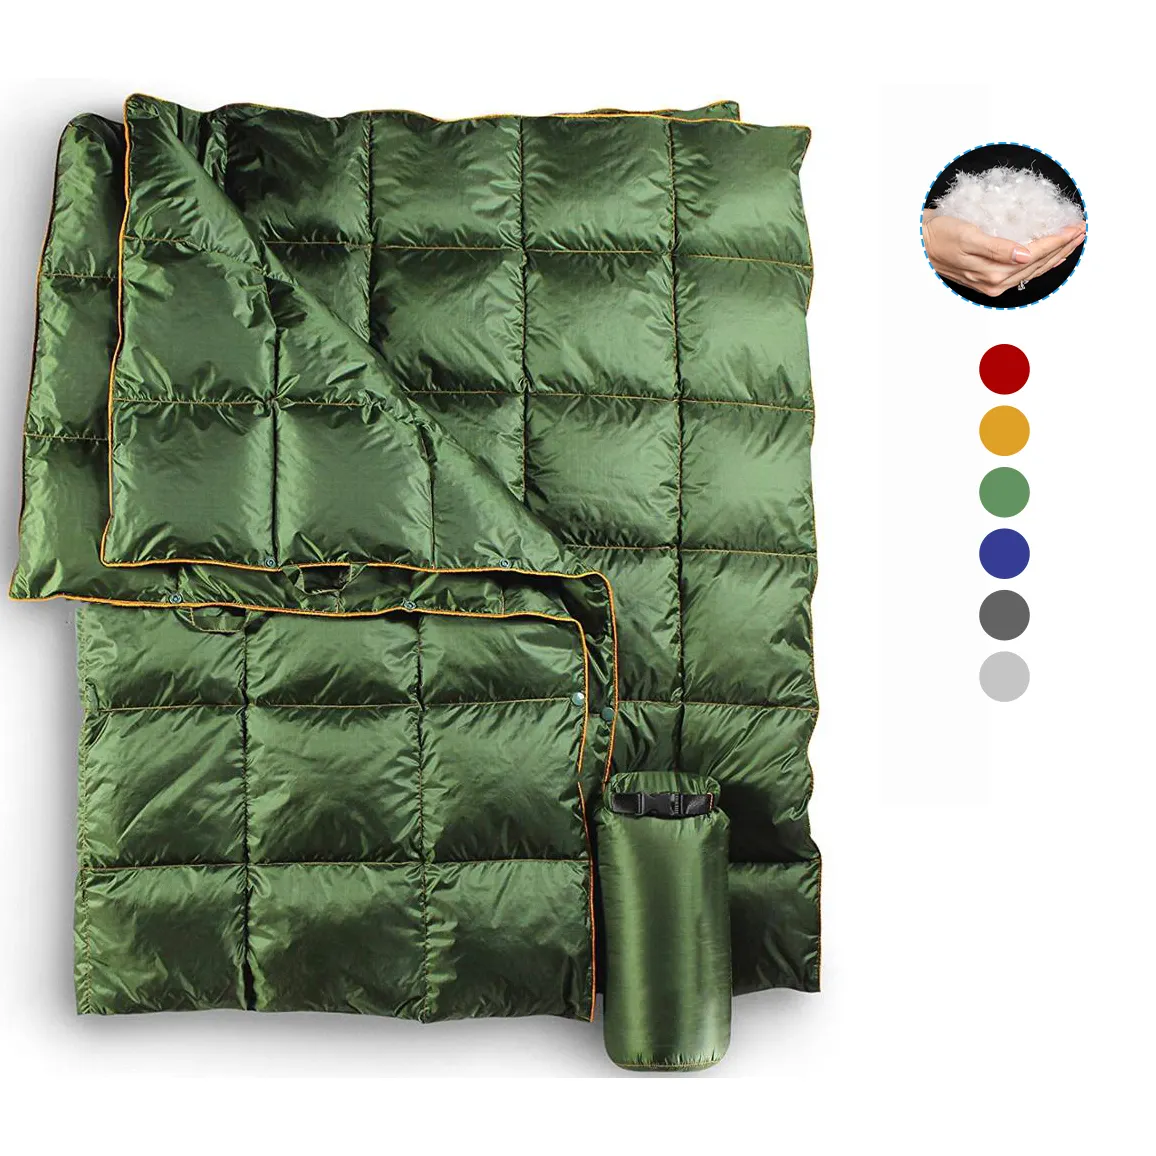 Free Sample Recycled Travel Outdoor Waterproof Puffy Down Blankets Camping Blanket For Picnics, Beach Trips